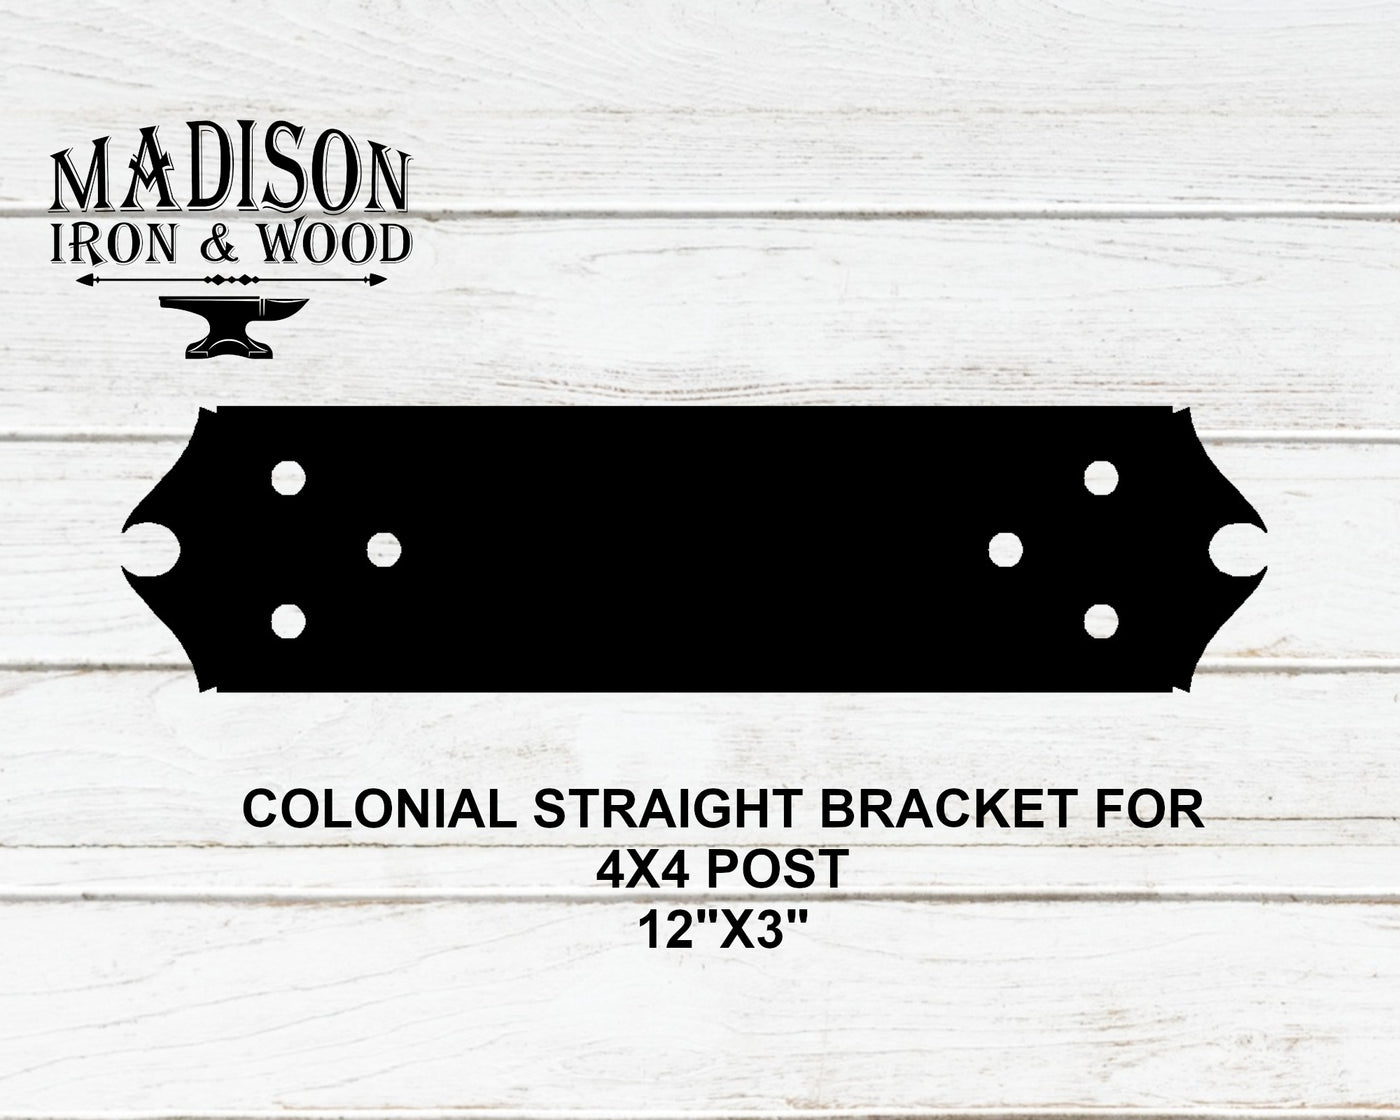 Colonial Brackets For 4x4 Dimensional Lumber - Madison Iron and Wood - Brackets - metal outdoor decor - Steel deocrations - american made products - veteran owned business products - fencing decorations - fencing supplies - custom wall decorations - personalized wall signs - steel - decorative post caps - steel post caps - metal post caps - brackets - structural brackets - home improvement - easter - easter decorations - easter gift - easter yard decor